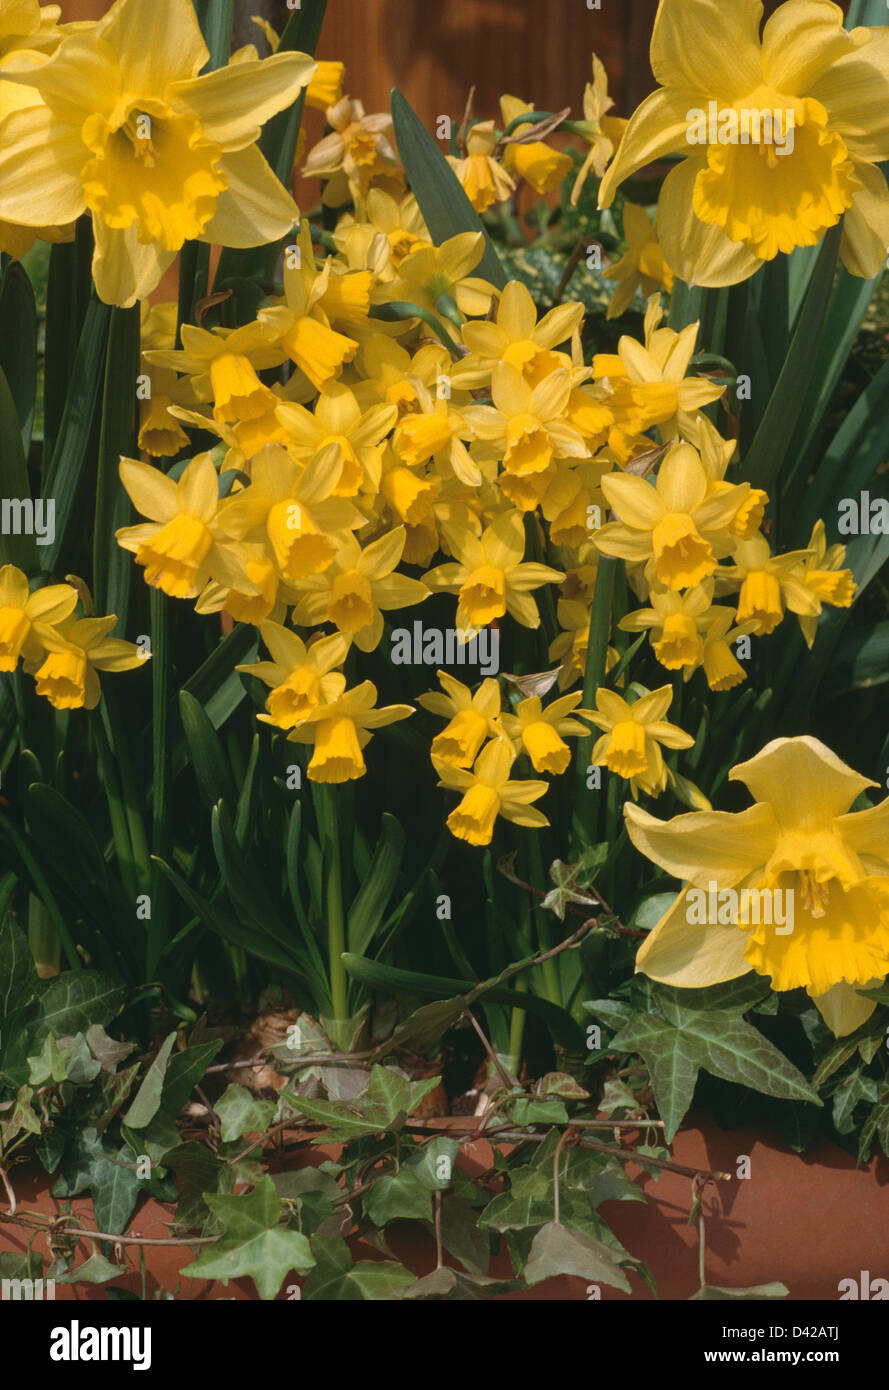 Close up of Narcissus 'Tete a Tete' with Narcissus 'February Gold' and Narcissus 'March Sunshine' Stock Photo